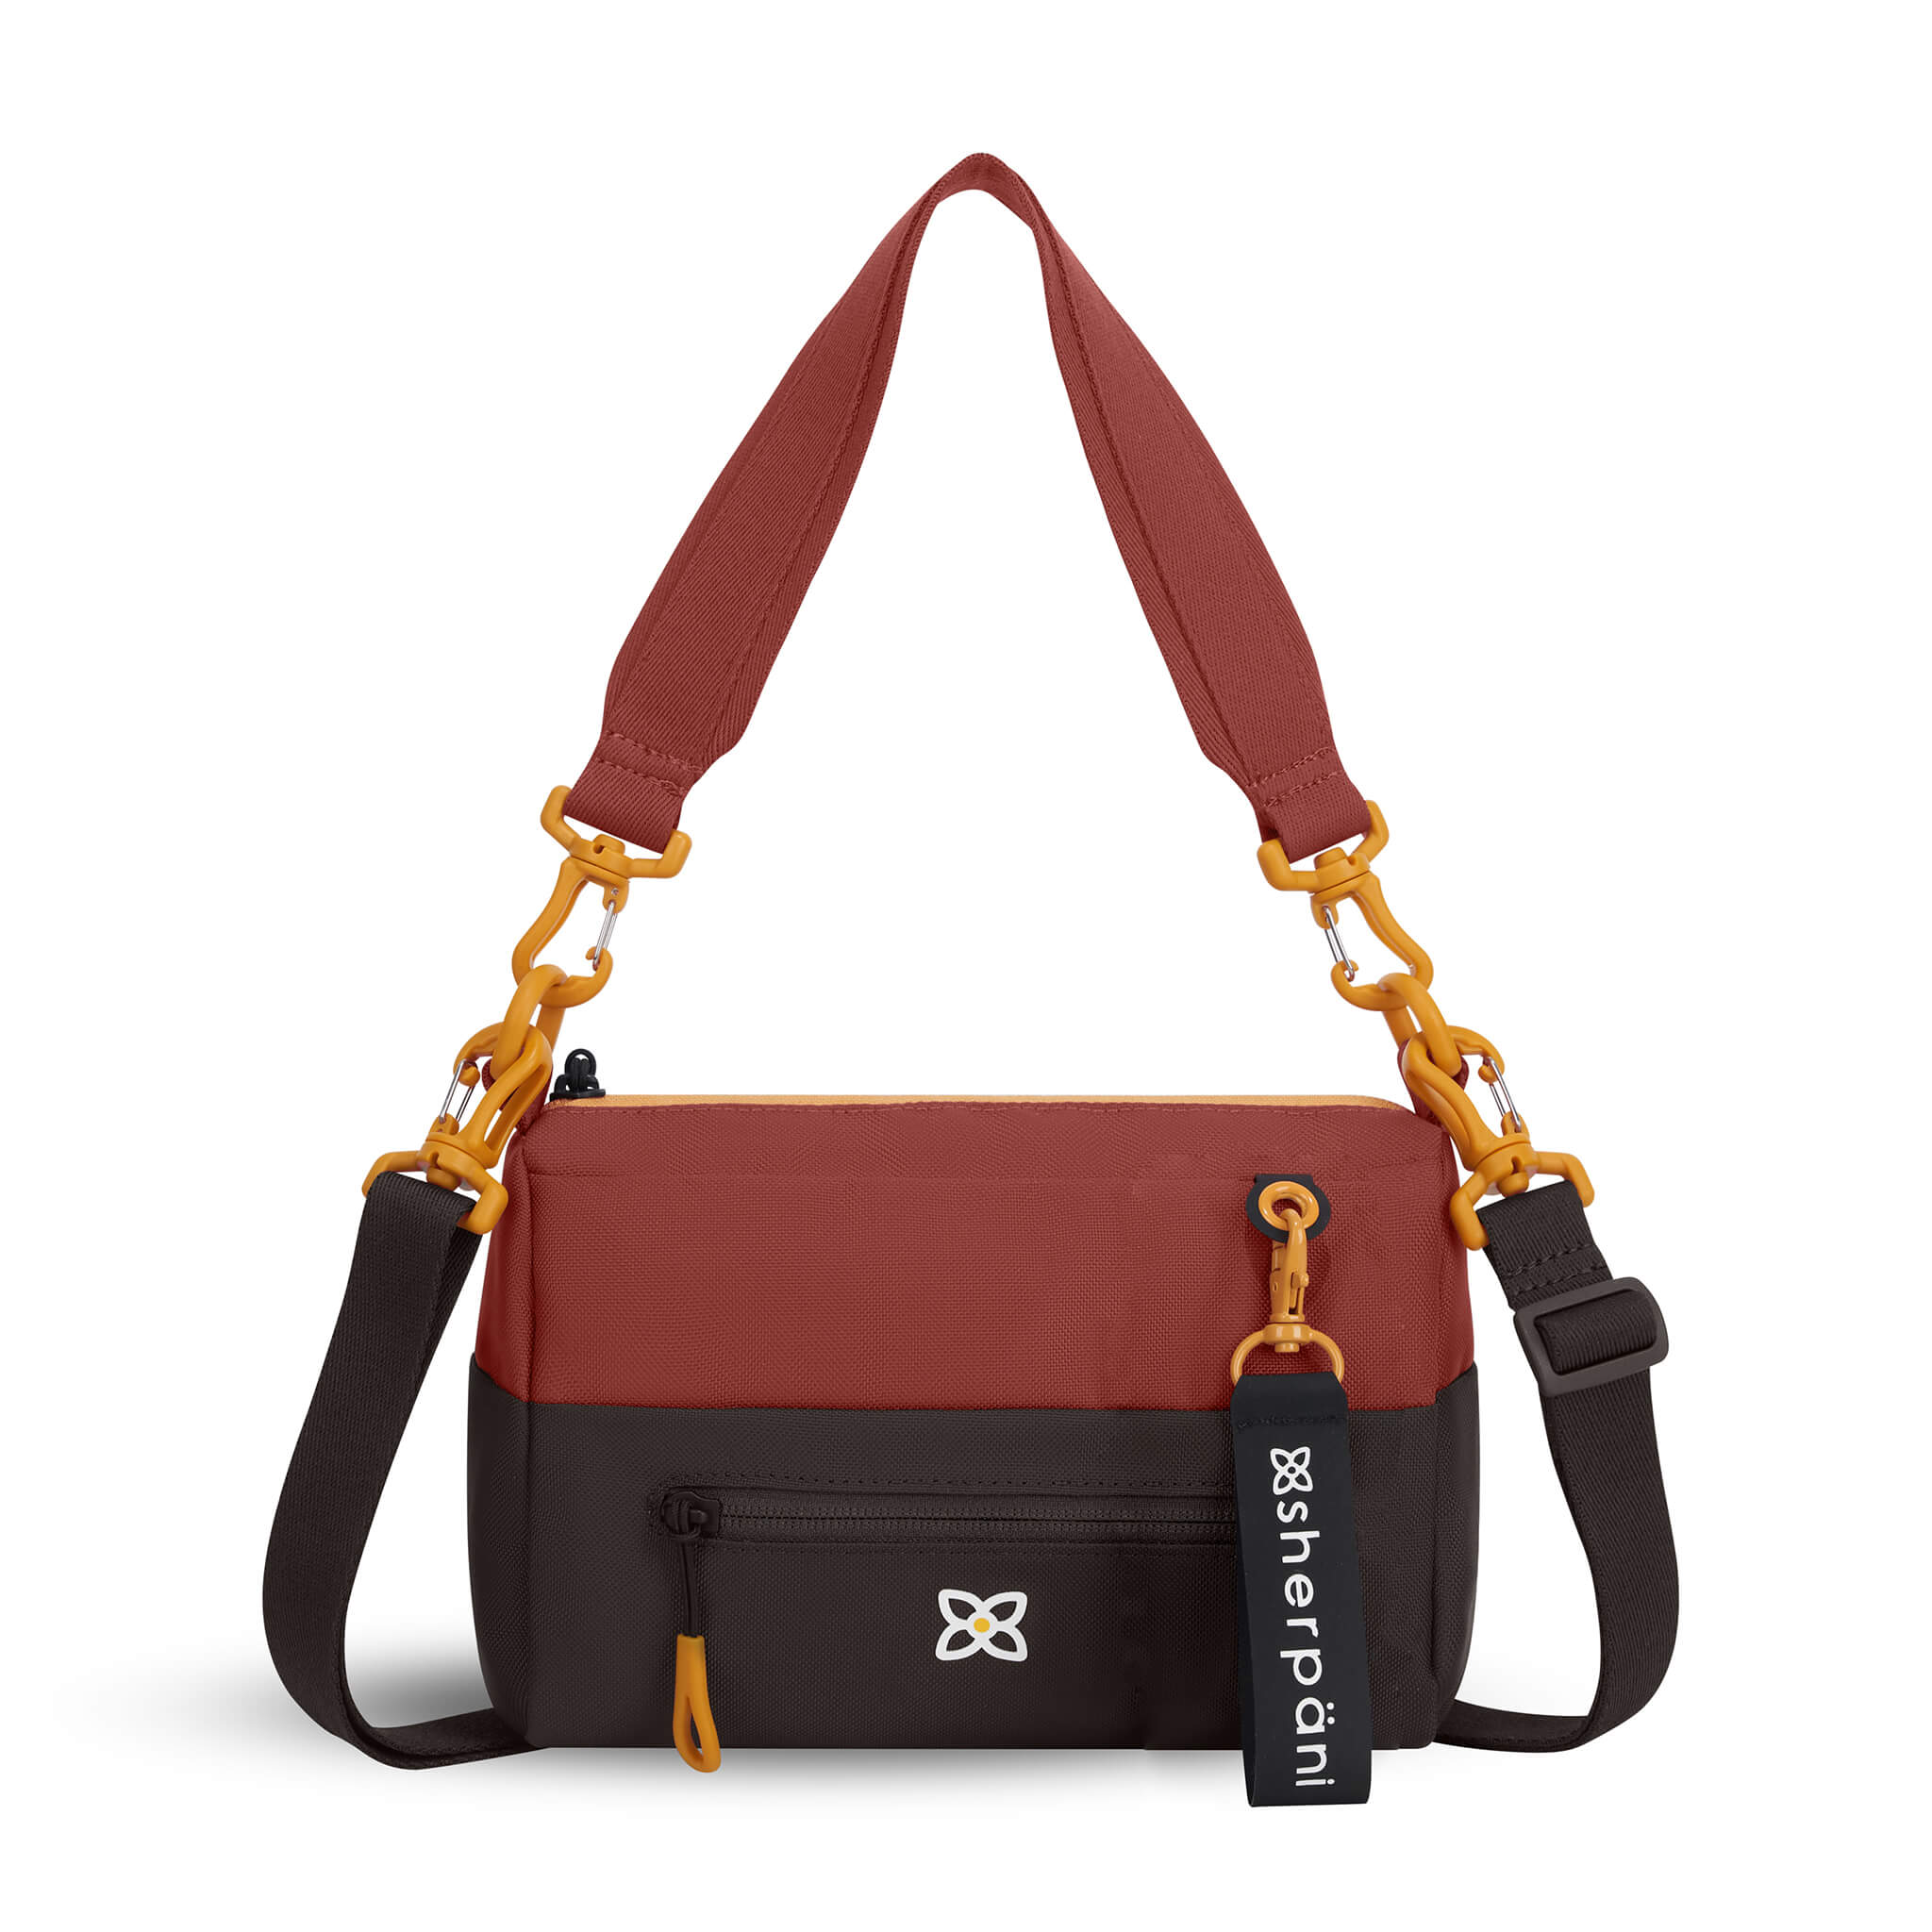 Flat front view of Sherpani mini shoulder bag, the Skye in Cider. Skye features include RFID security, detachable keychain, outside zipper pocket, two inside zipper pockets and two removable straps: a short shoulder strap and a longer adjustable crossbody strap. The Cider color is two-toned in burgundy and dark brown with yellow accents.